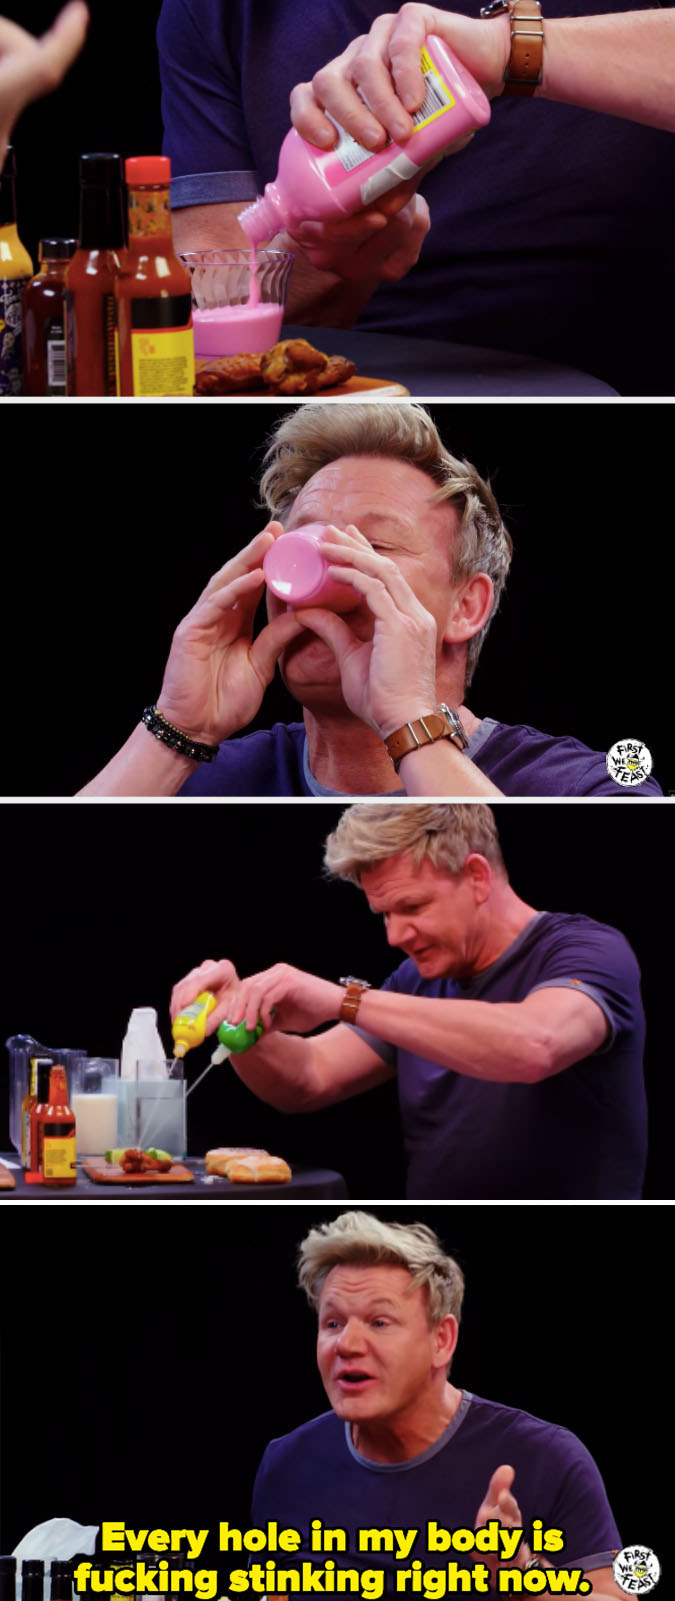 Gordon Ramsay chugging Pepto Bismol and pouring lemon and lime juice over wings to make it through the interview